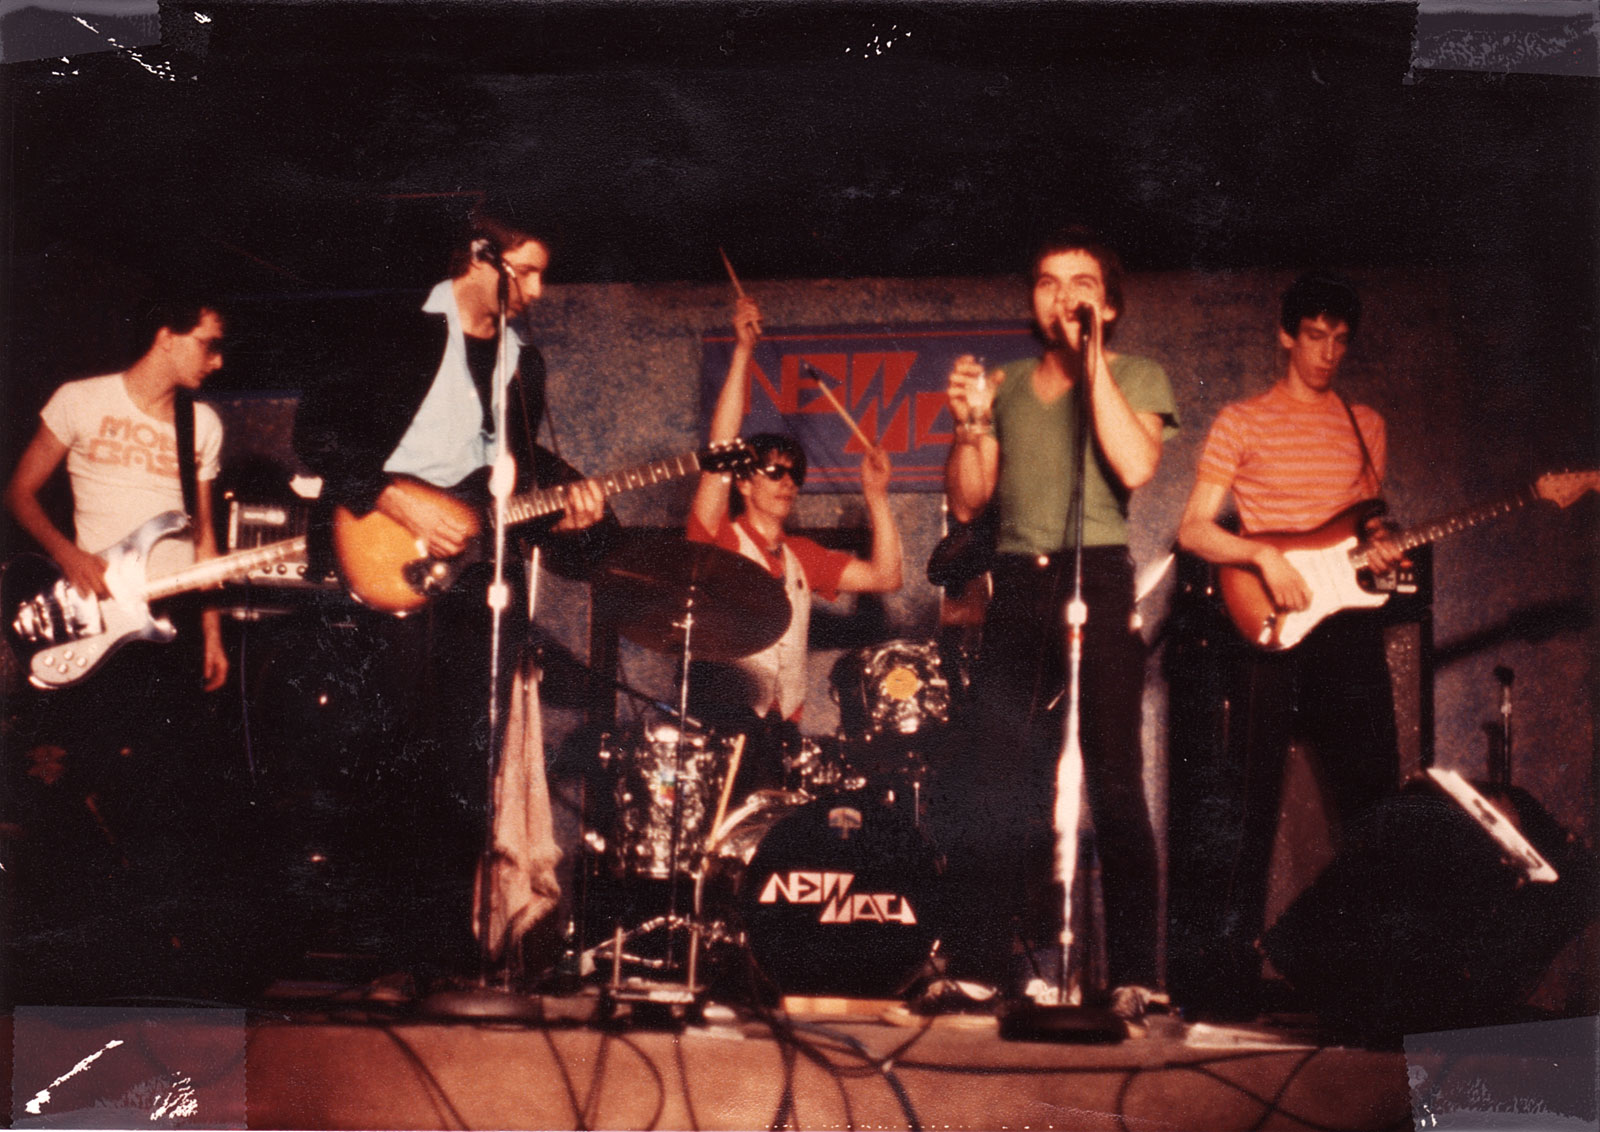 New Math performing at the Orange Monkey in 1977. Robert Slide - bass, Gary Trainer - guitar, Paul Dodd - drums, Kevin Patrick - vocals, Dale Mincey - guitar